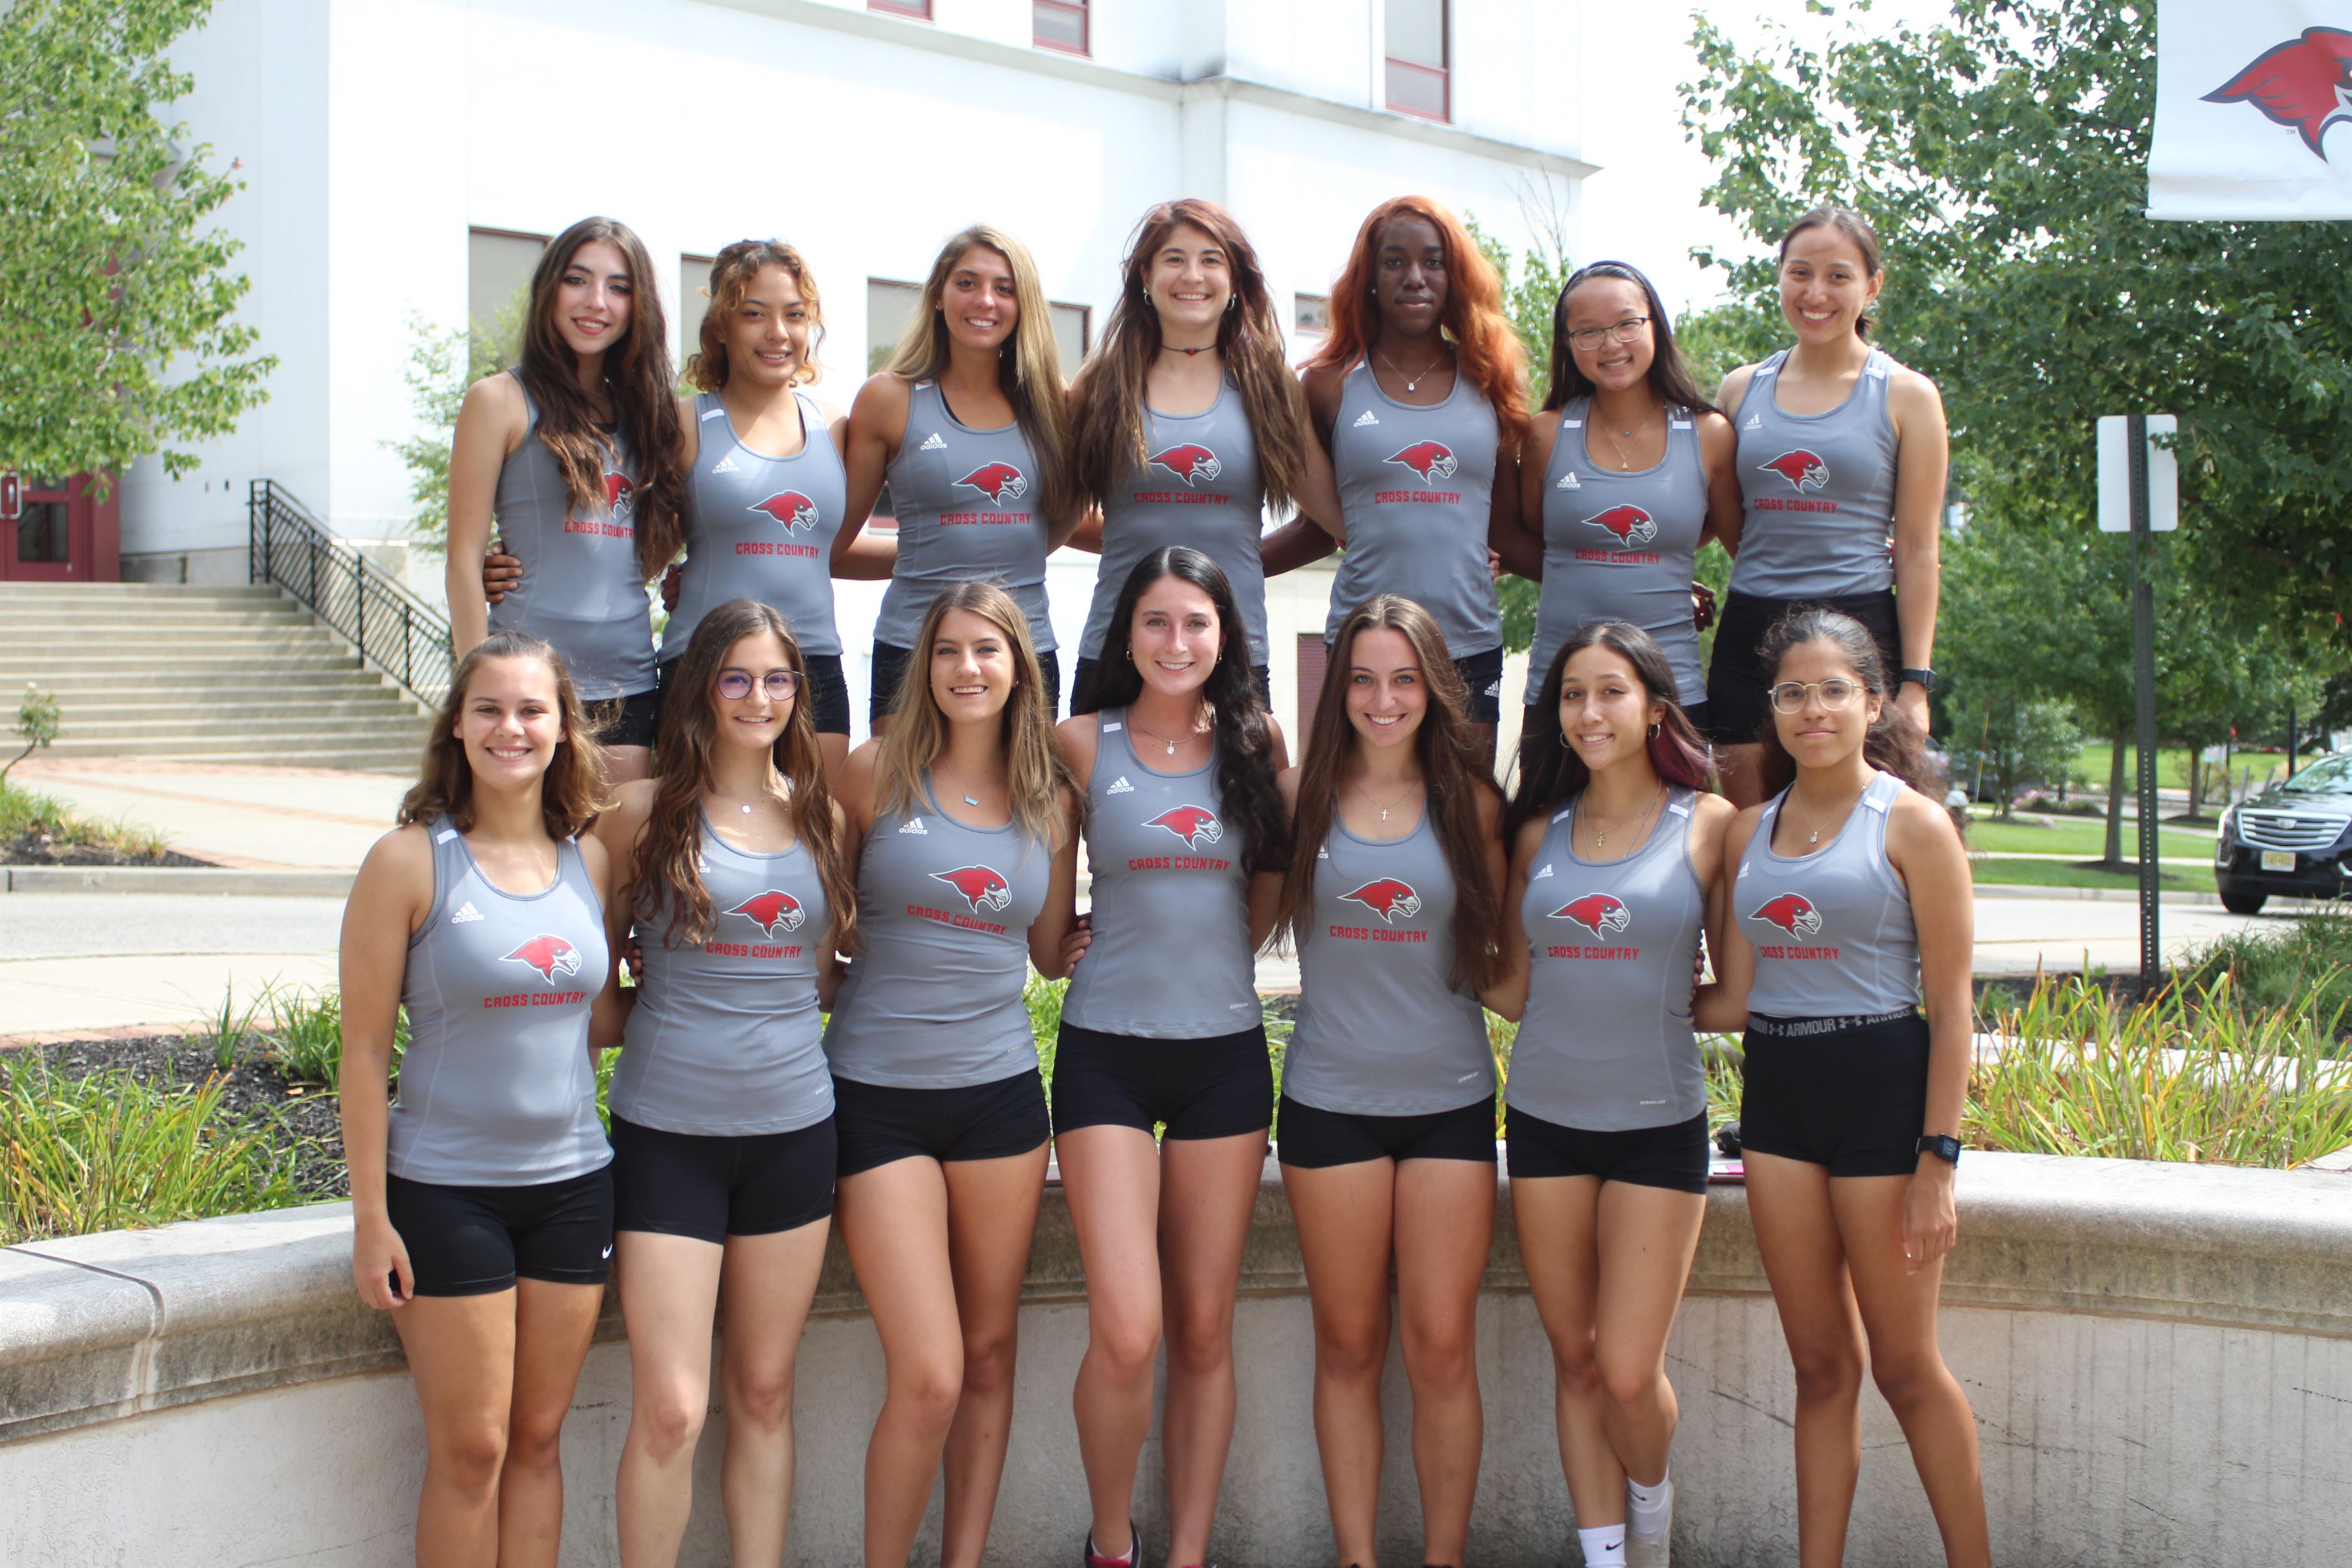 The 2021 women's cross country team poses for a team photo during their media day.